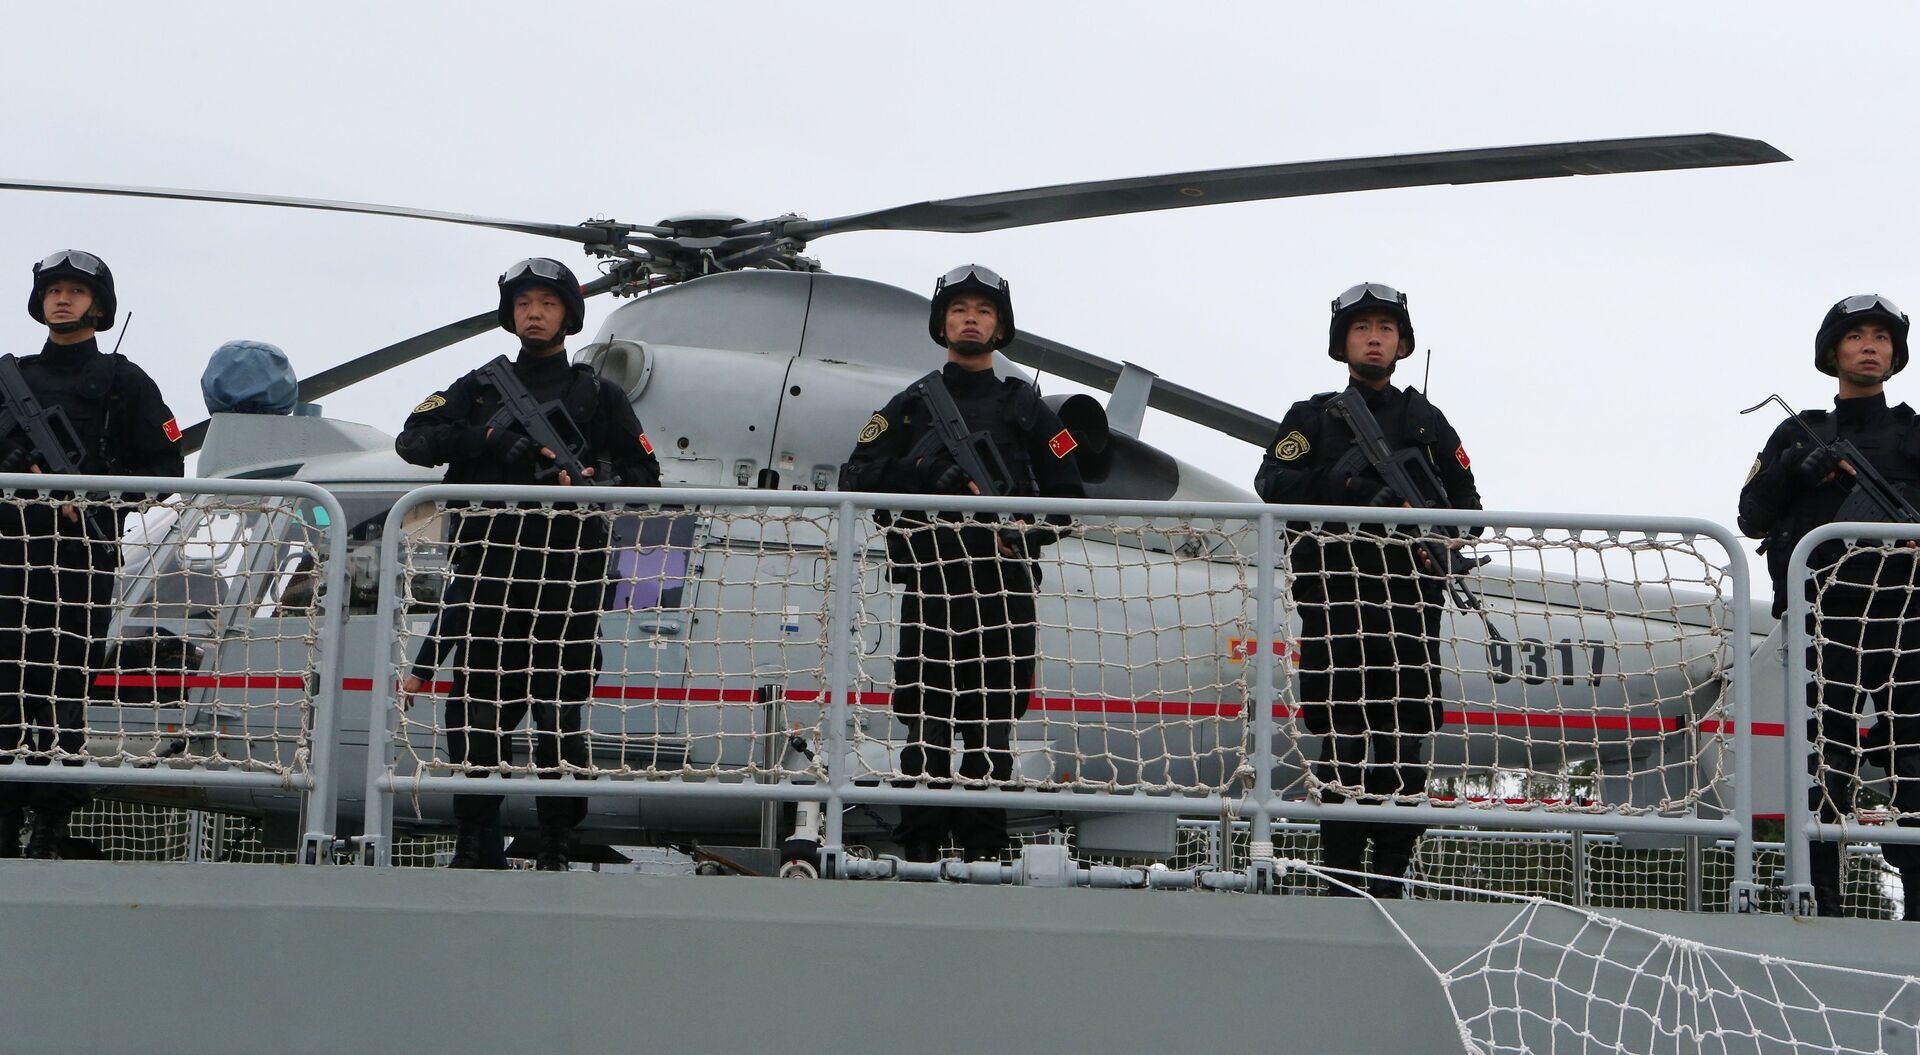 Crew of the Chinese Navy's missile frigate Yuncheng that arrived in Baltiysk for the 2017 Naval Cooperation Russia-China drills - Sputnik International, 1920, 22.12.2021